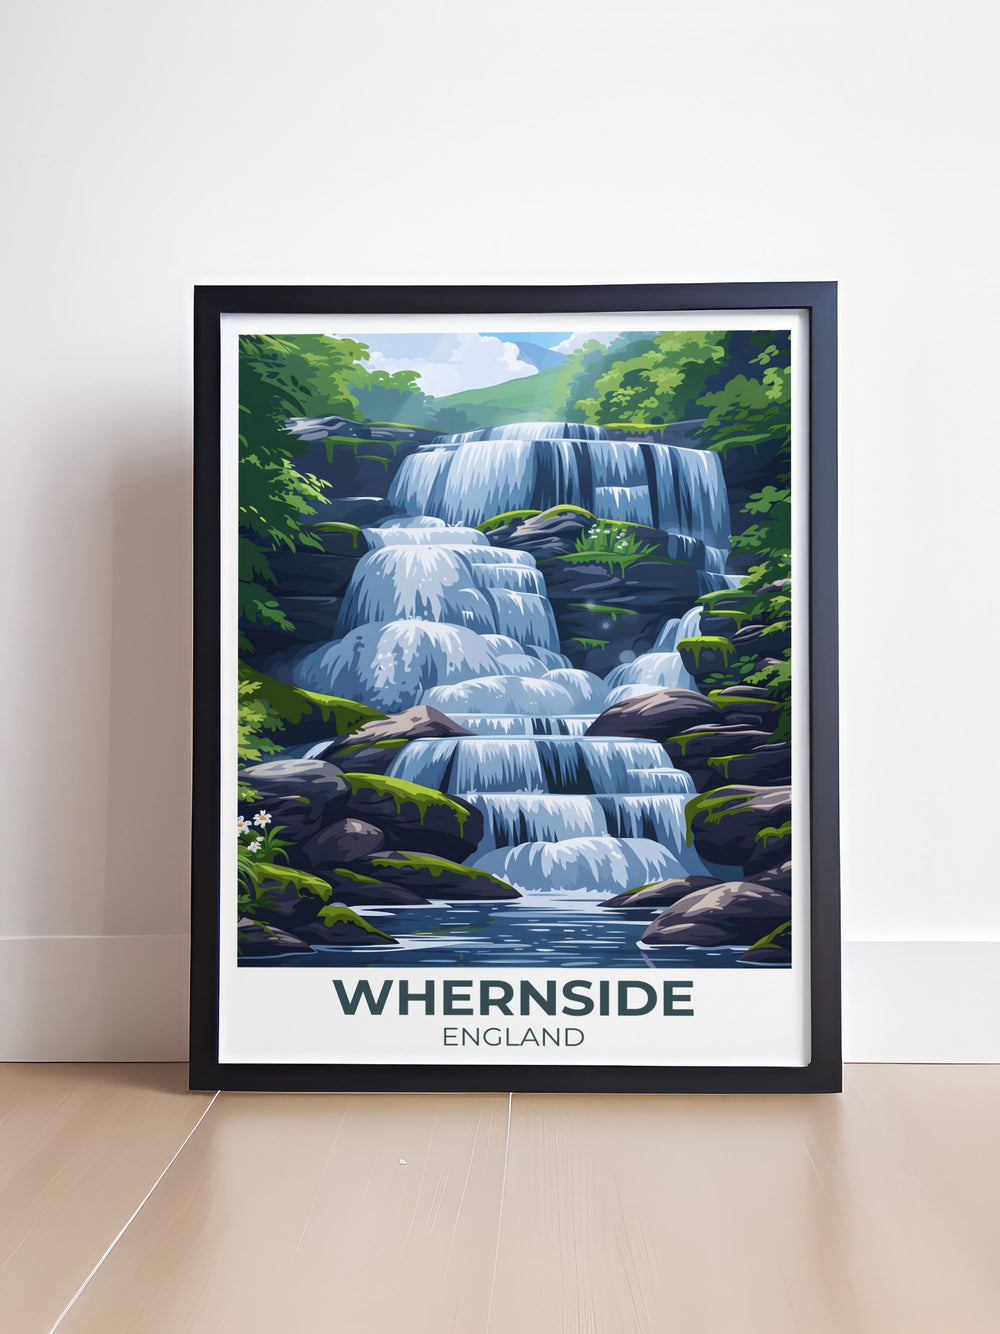 Elegant gallery wall art of Whernside, showcasing the beauty of its rugged trails and expansive views. This artwork creates a focal point that brings the natural elegance of the Yorkshire Dales into your home.